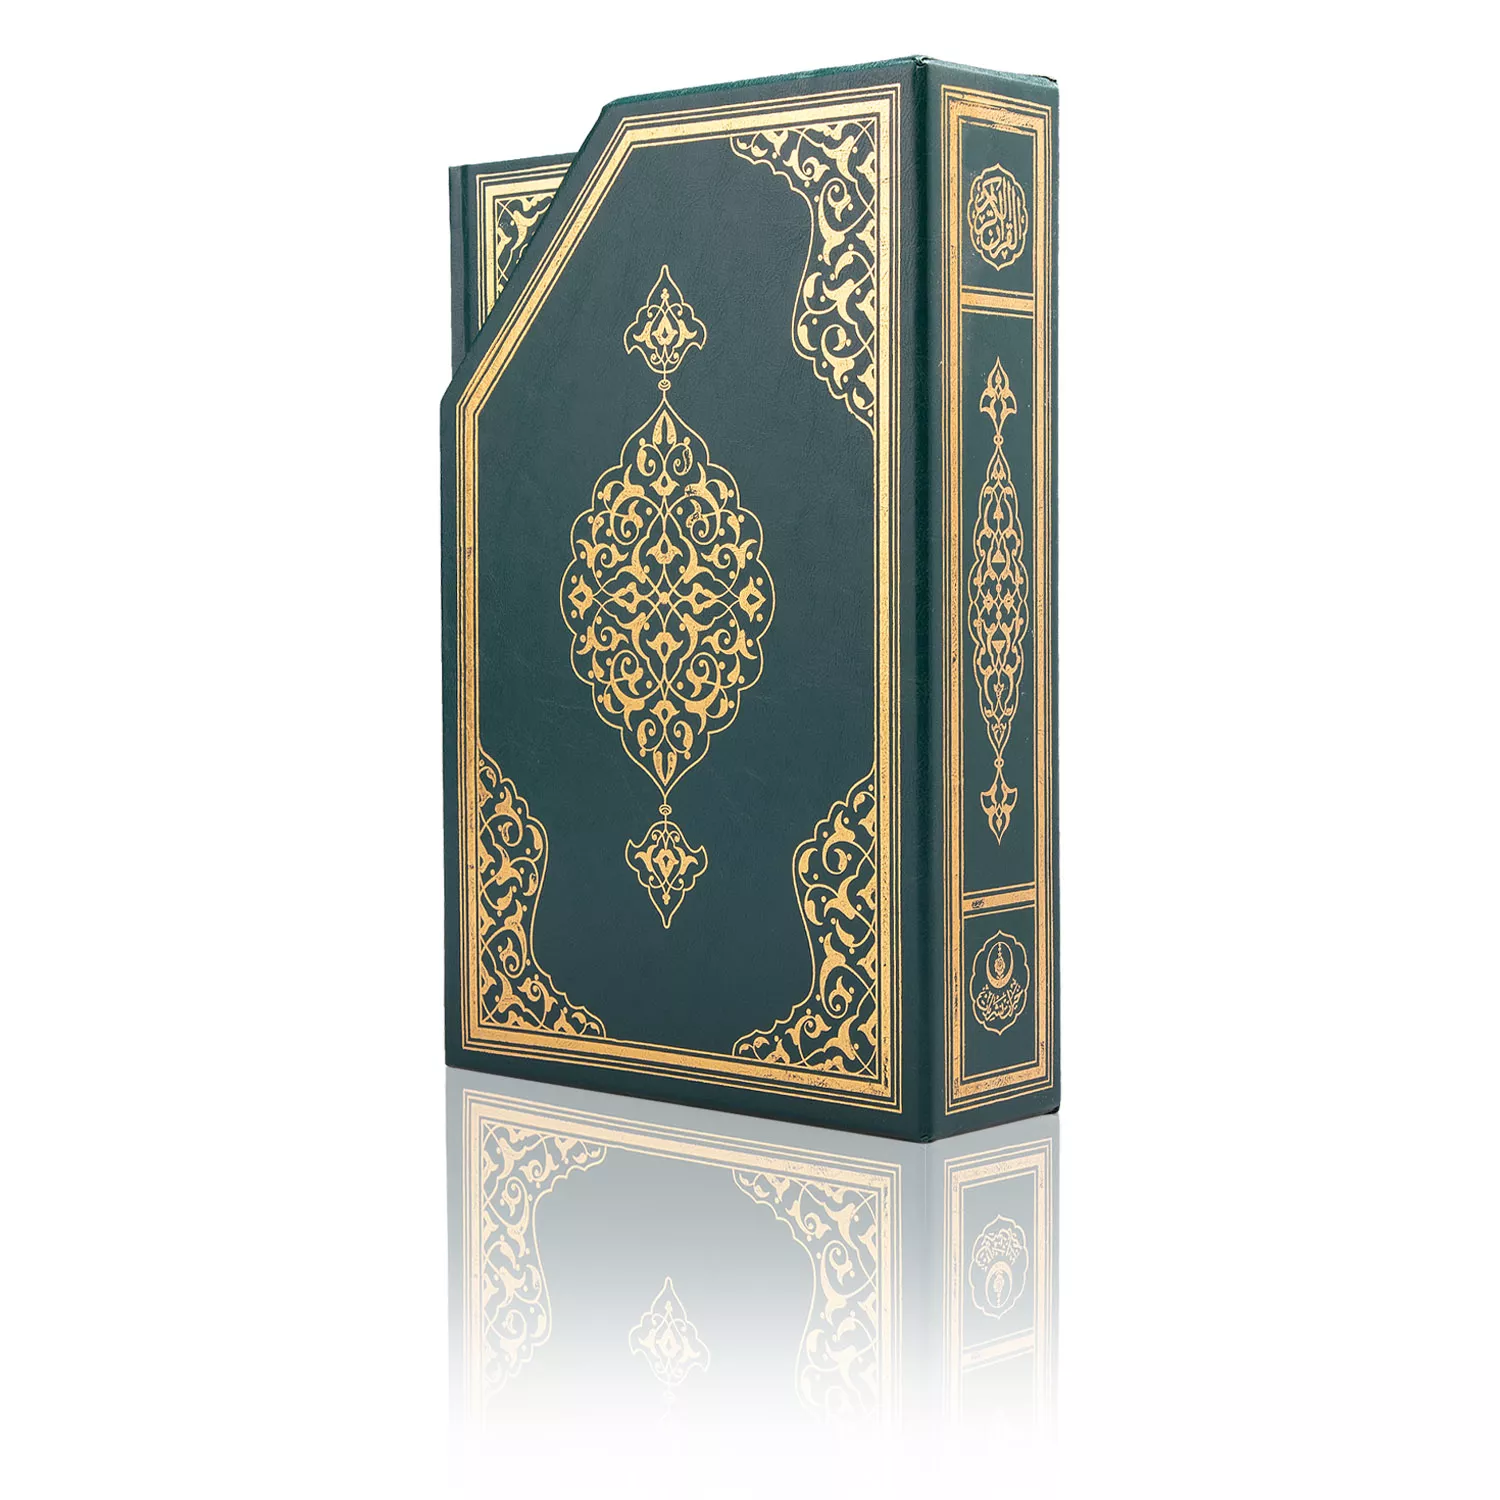 Hafiz Size 30-Juz-in-Five-Volume Qur'an Al-Kareem (Two-Colour, With Special Box, Stamped)